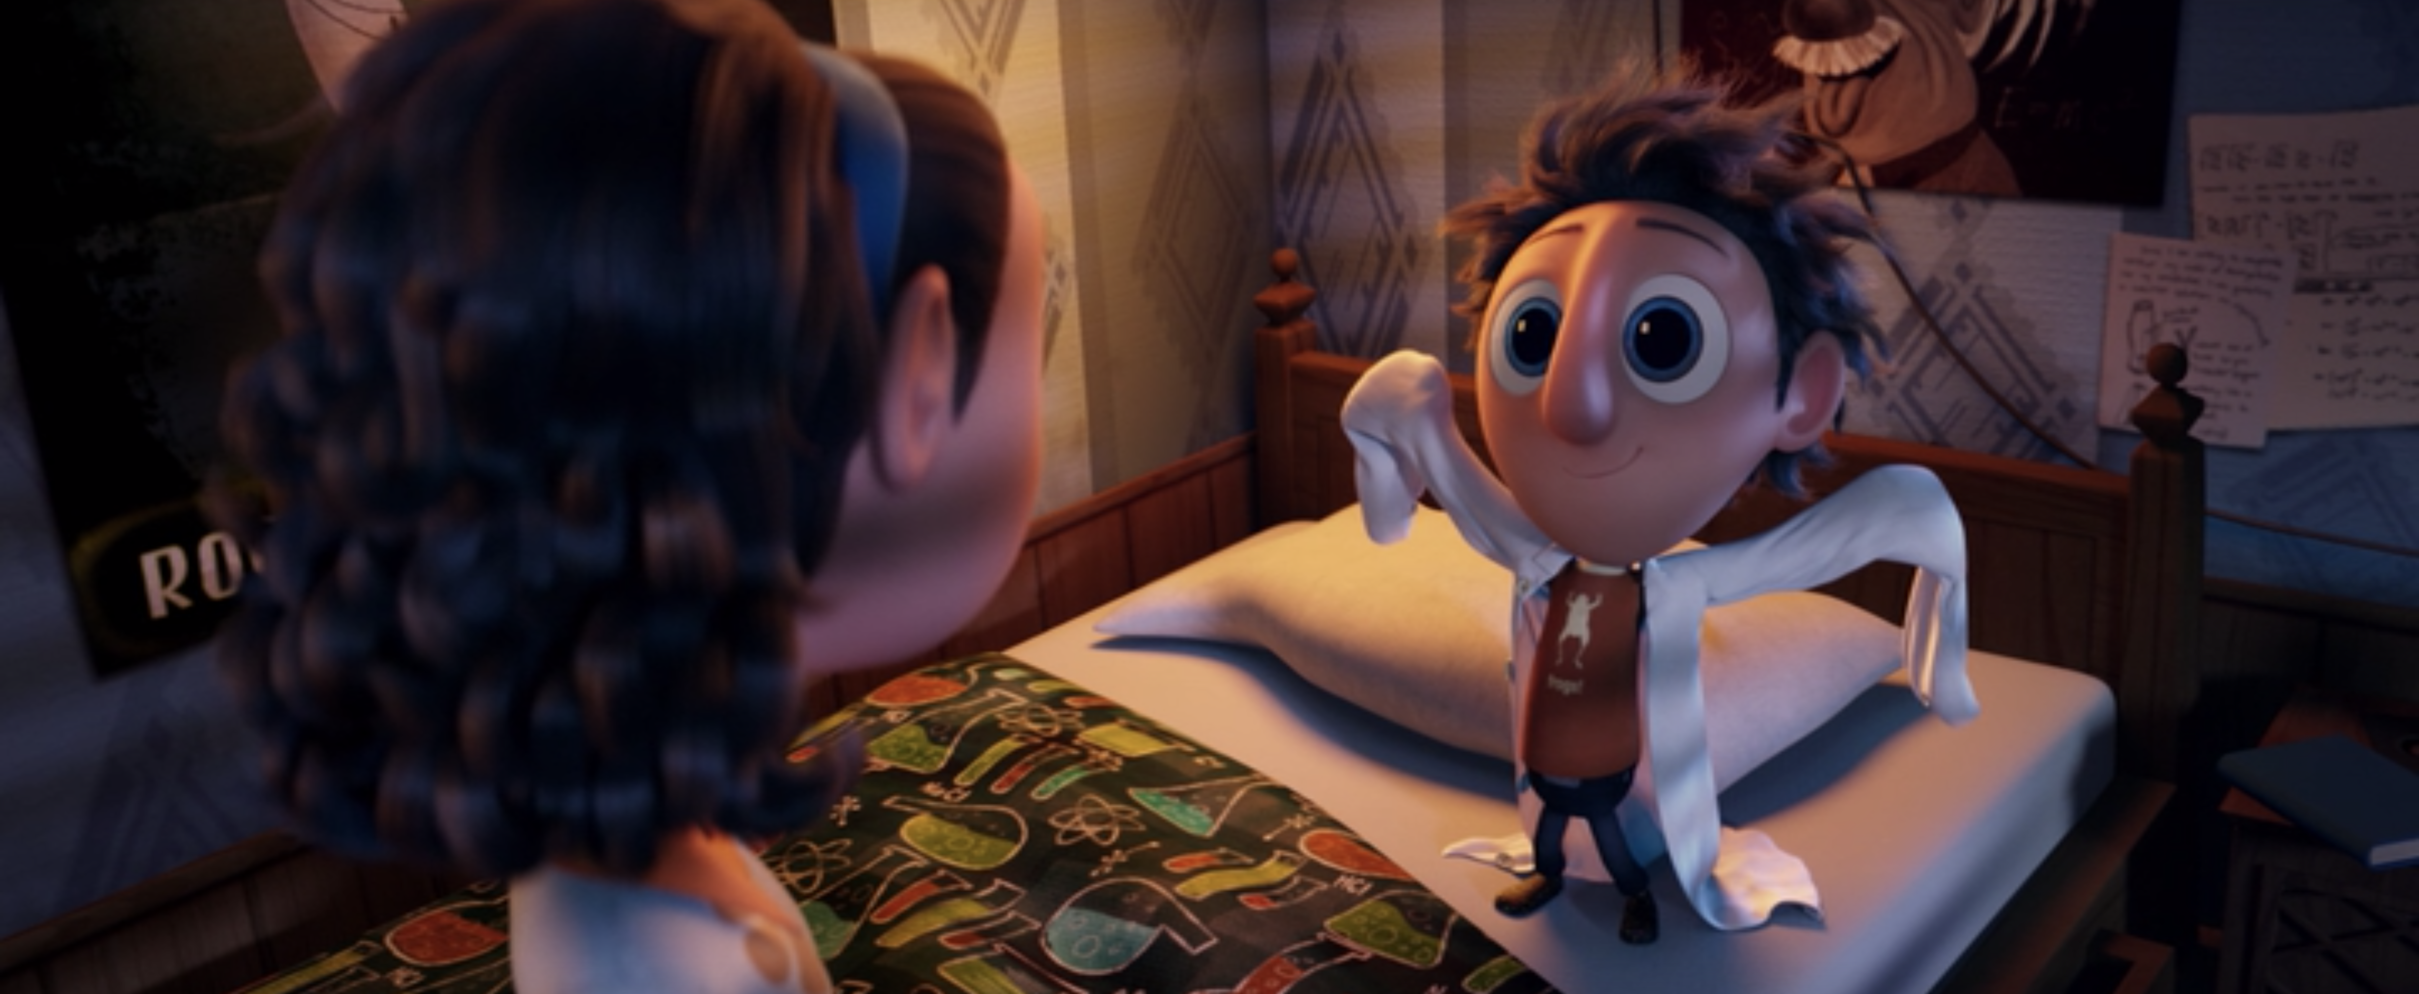 A Delicious Celebration: 'Cloudy with a Chance of Meatballs' 10 Years Later  - mxdwn Movies